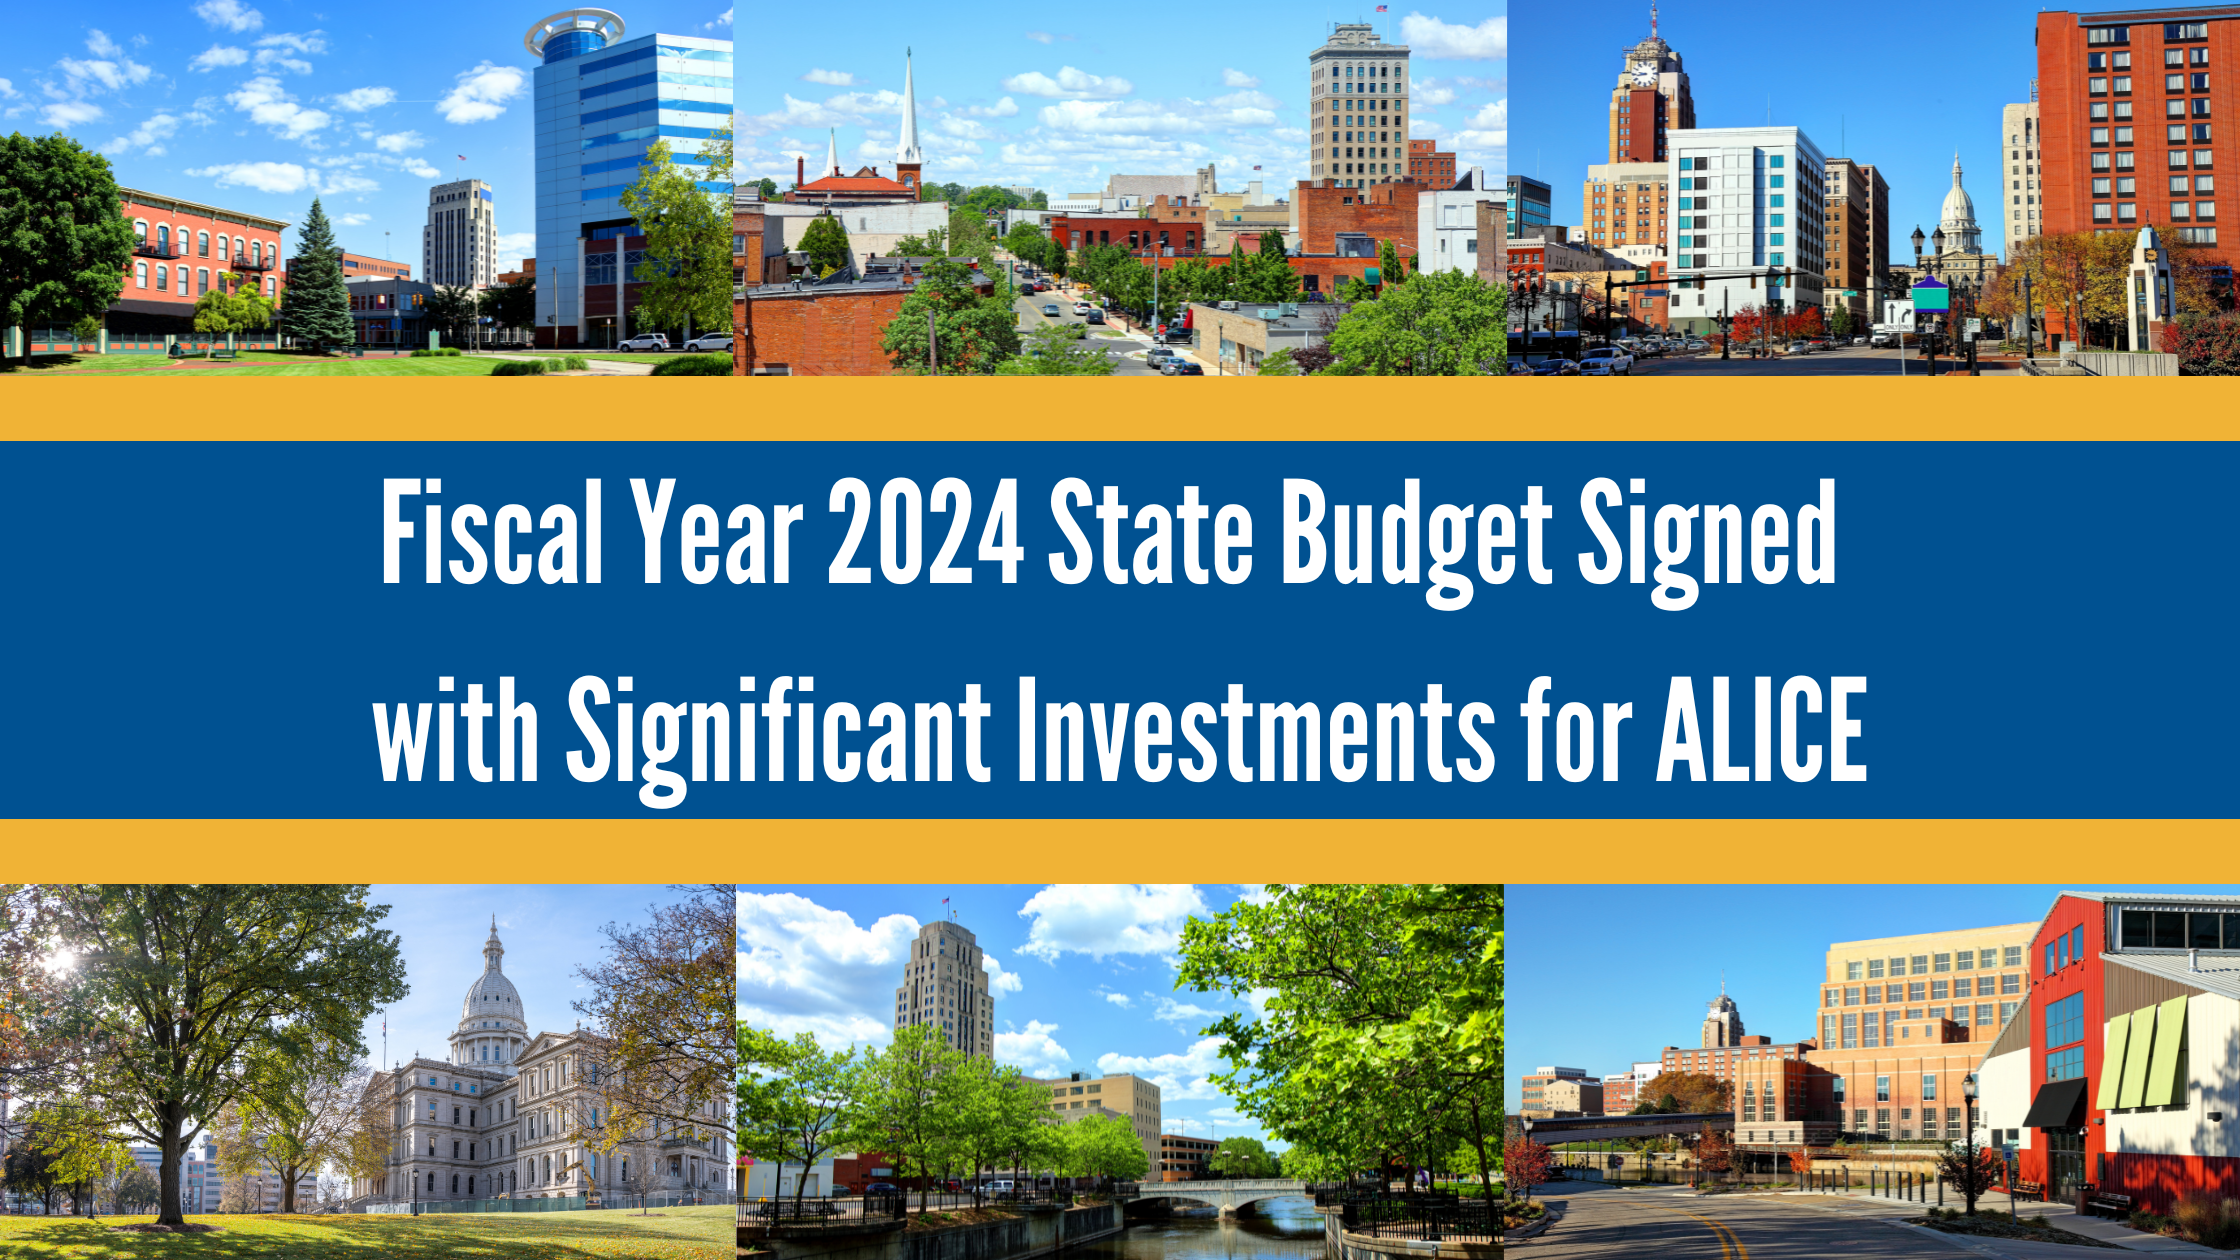 Fiscal Year 2024 State Budget Signed with Significant Investments for ALICE